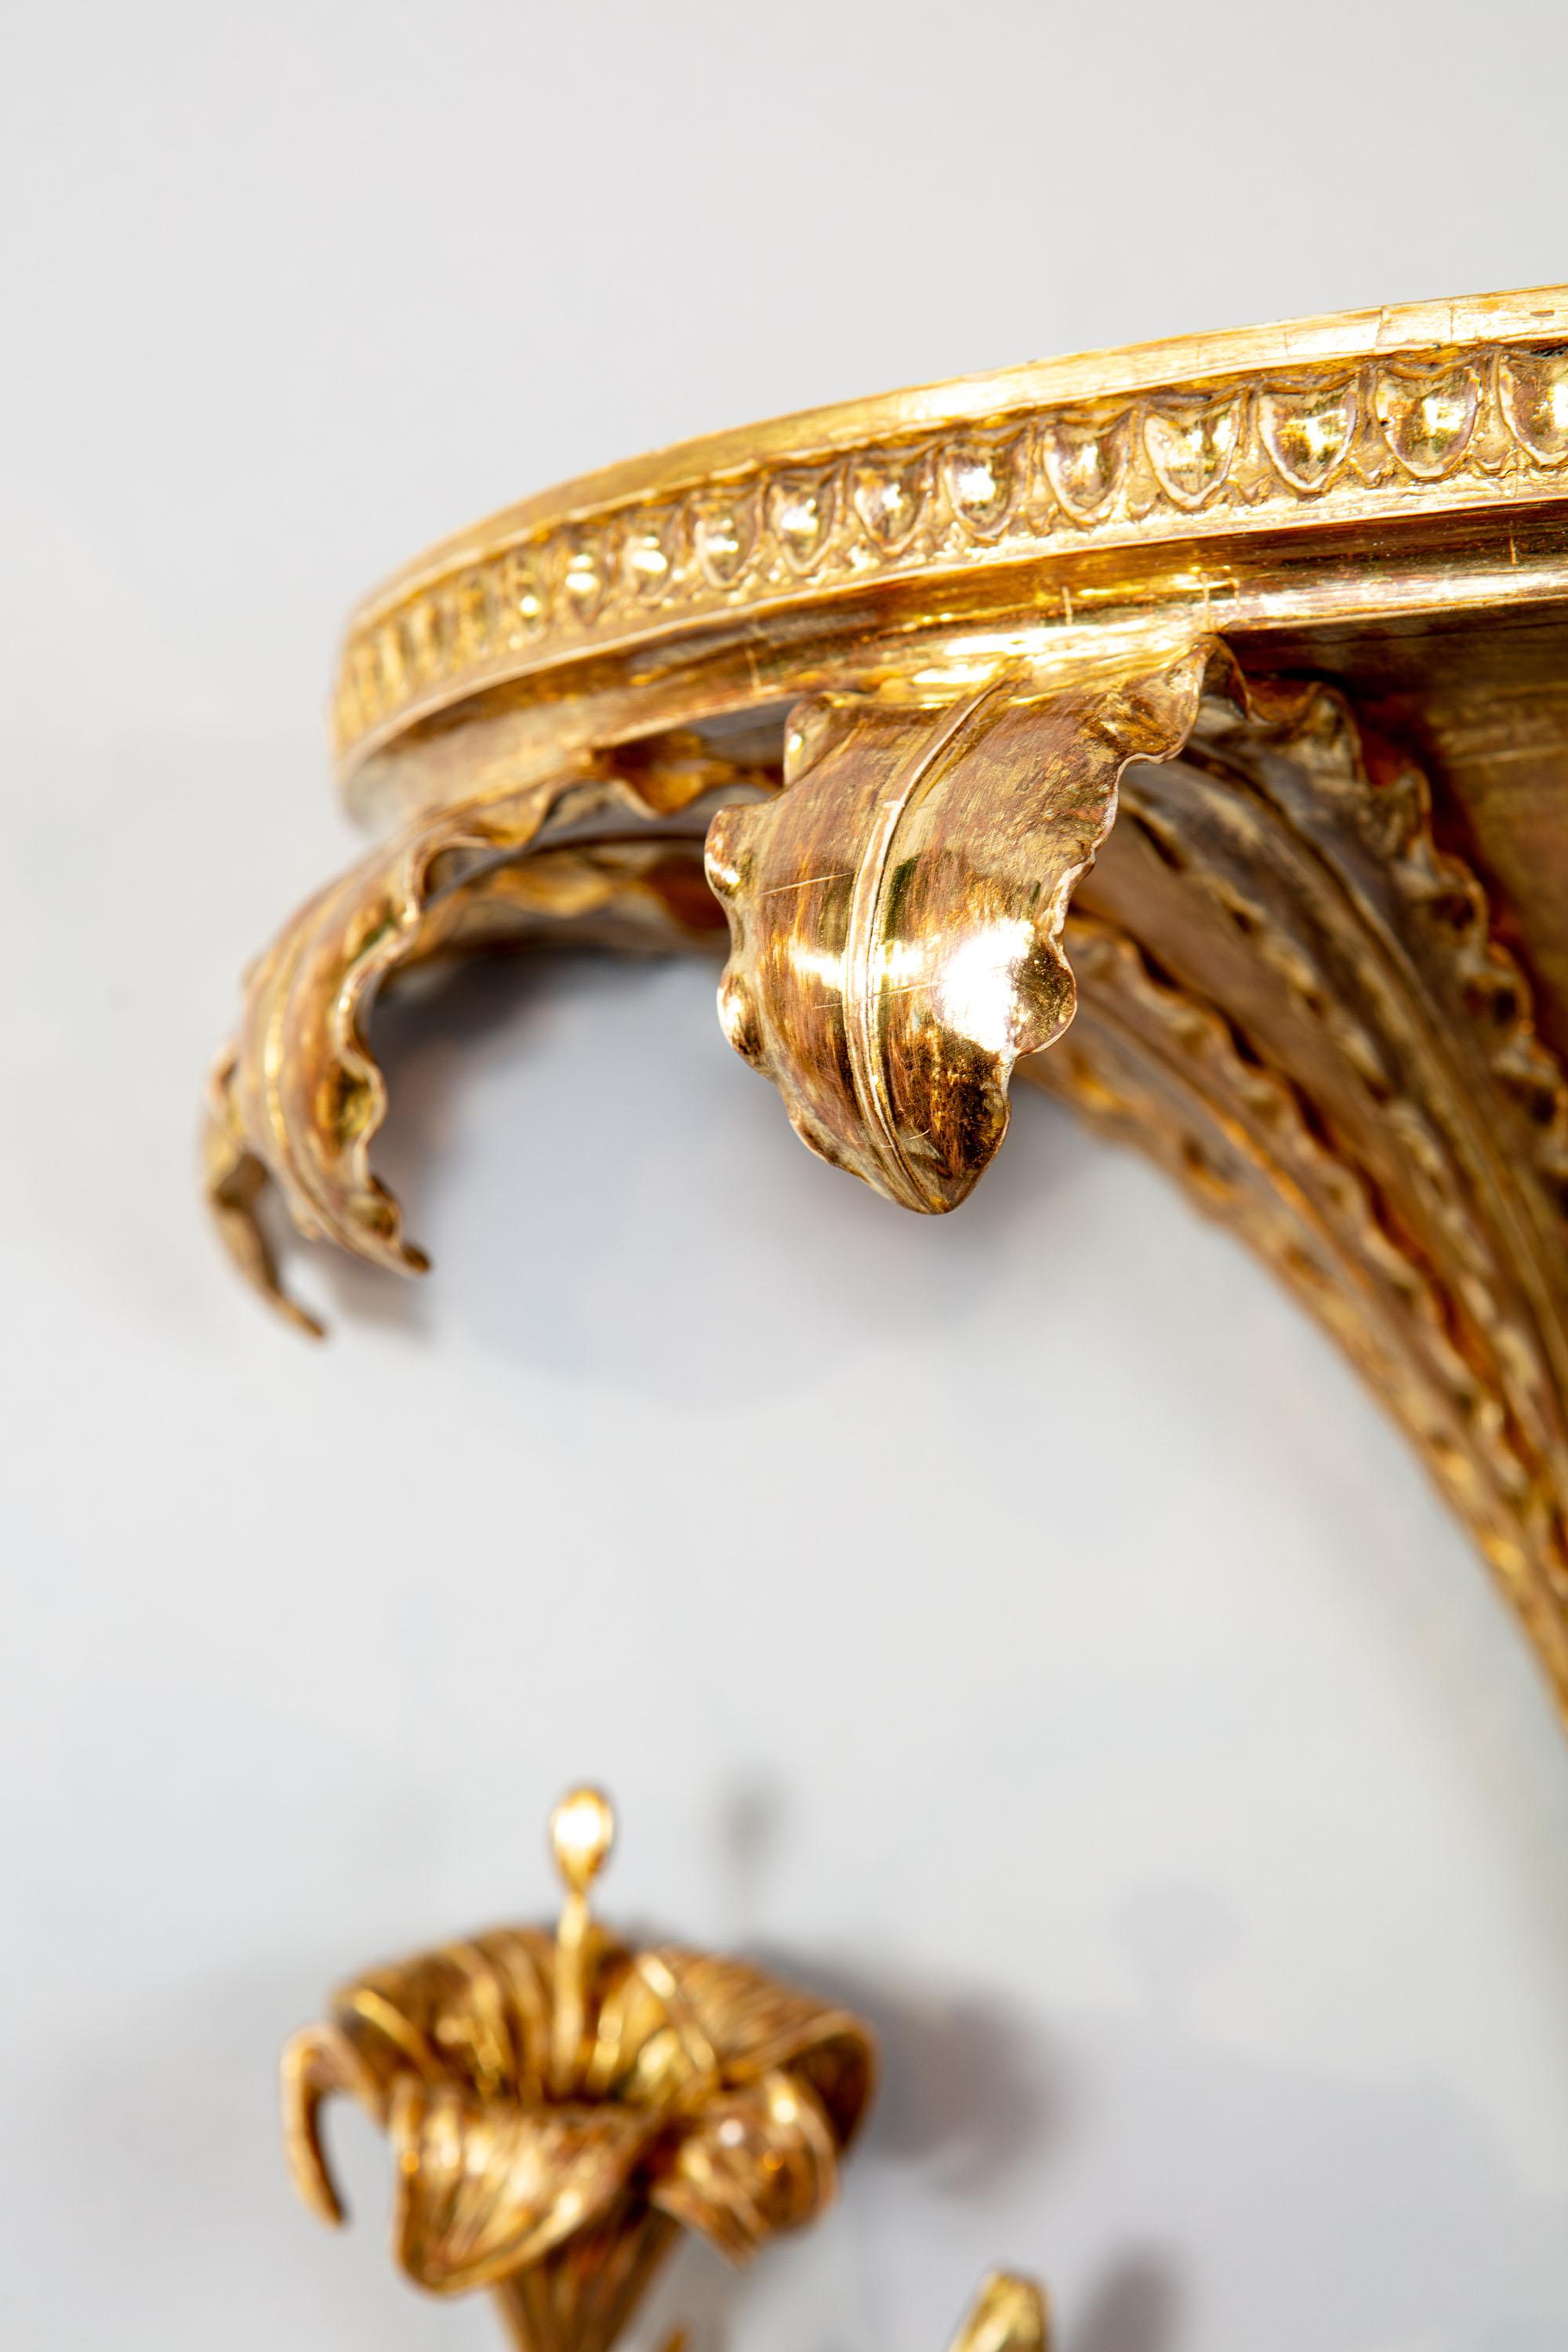 Pair of George III Giltwood Lily Wall-Brackets In Excellent Condition For Sale In London, by appointment only